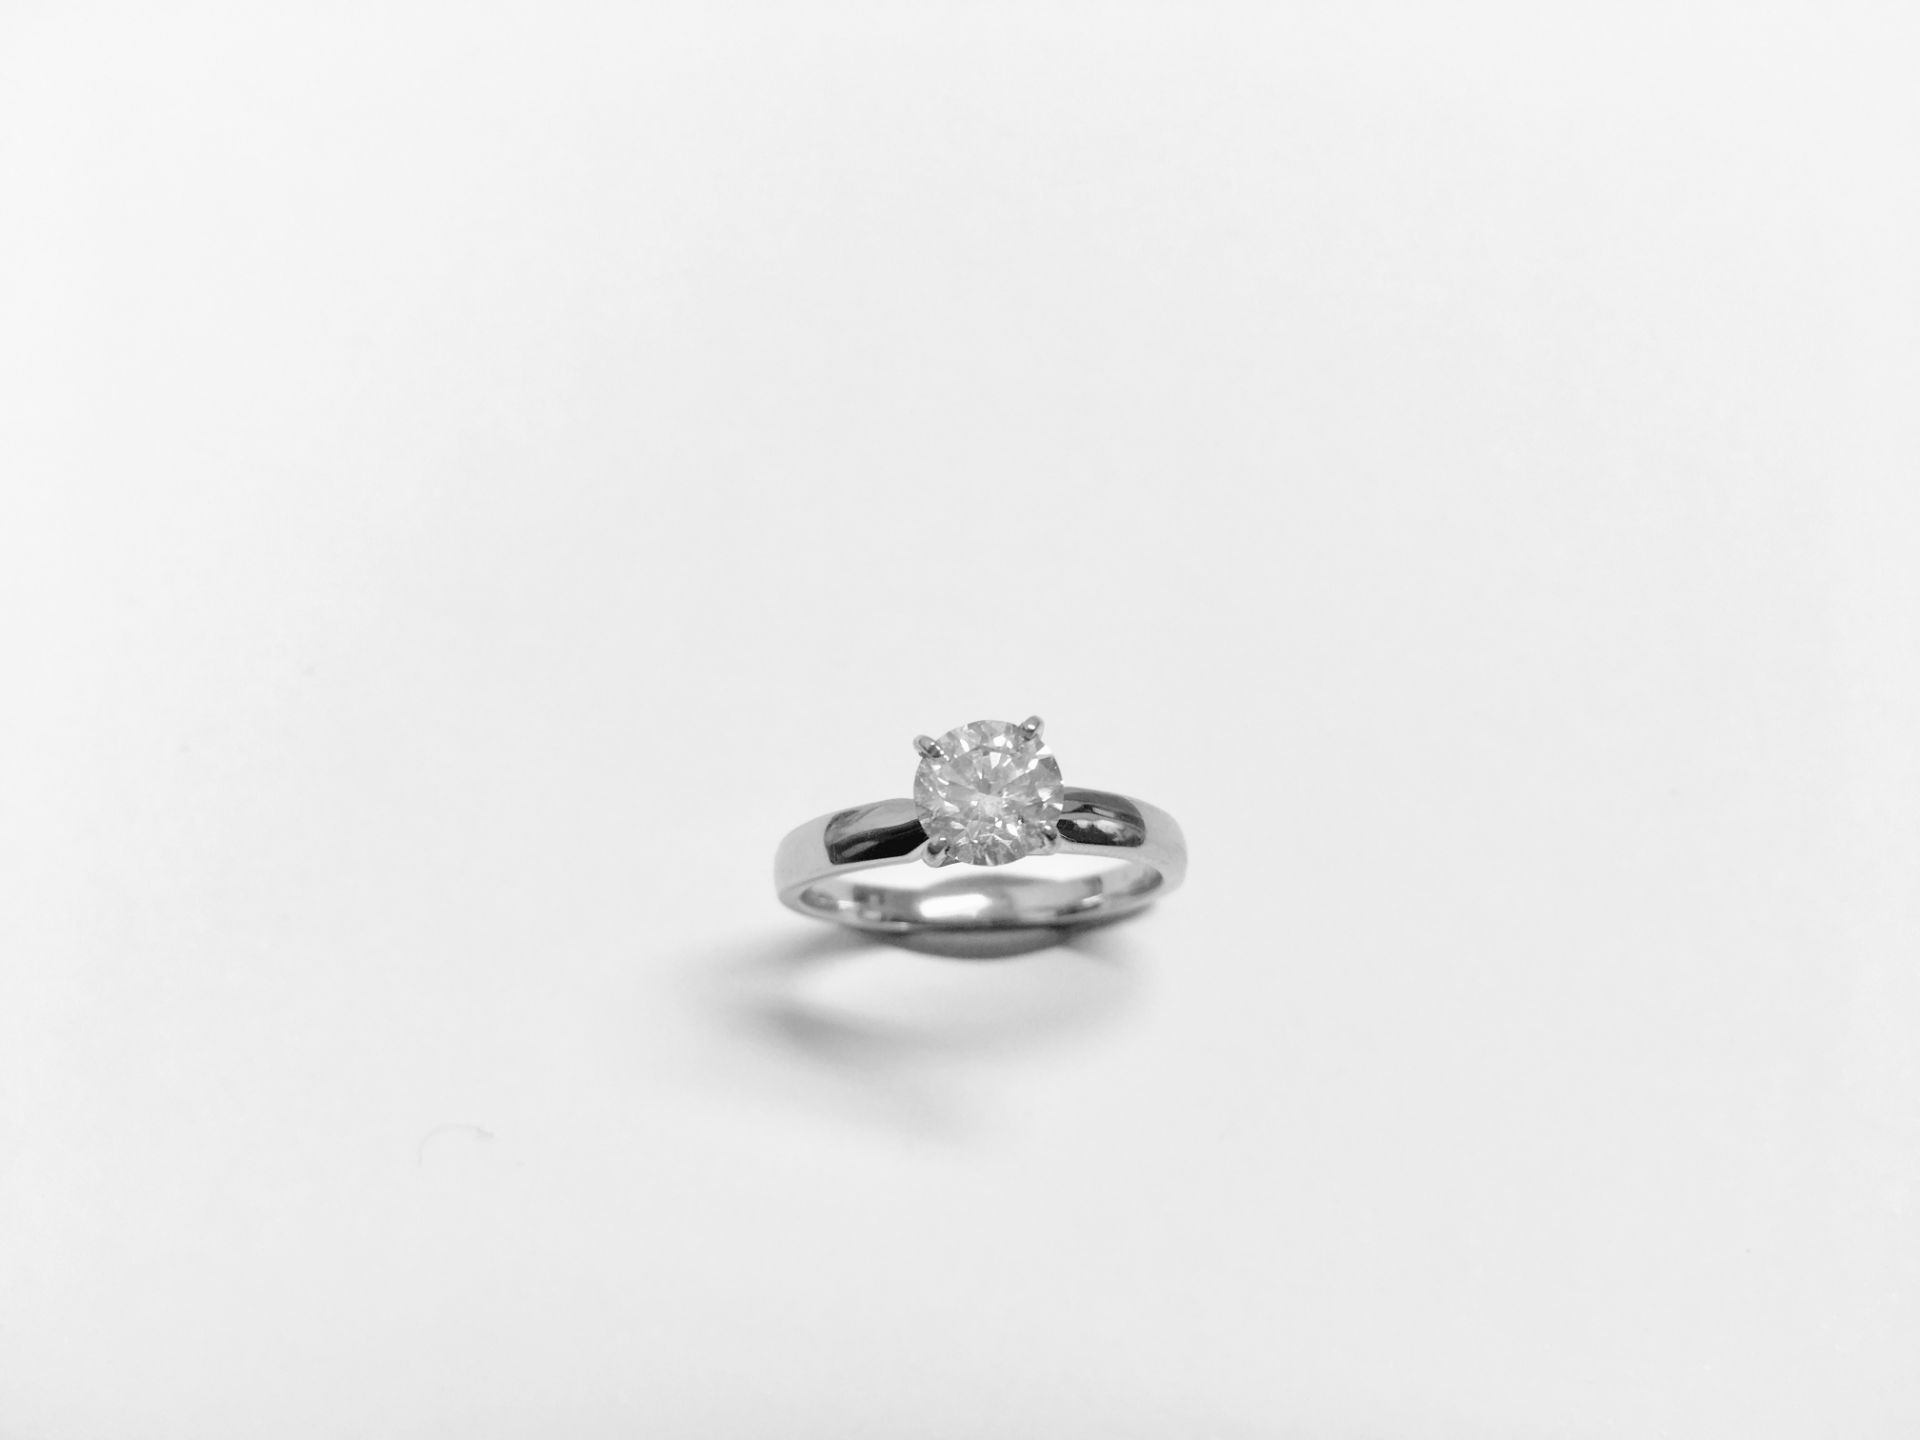 1.15ct diamond solitaire ring set in 18ct white gold. H colour and SI2 clarity. 4 claw setting. - Image 3 of 4